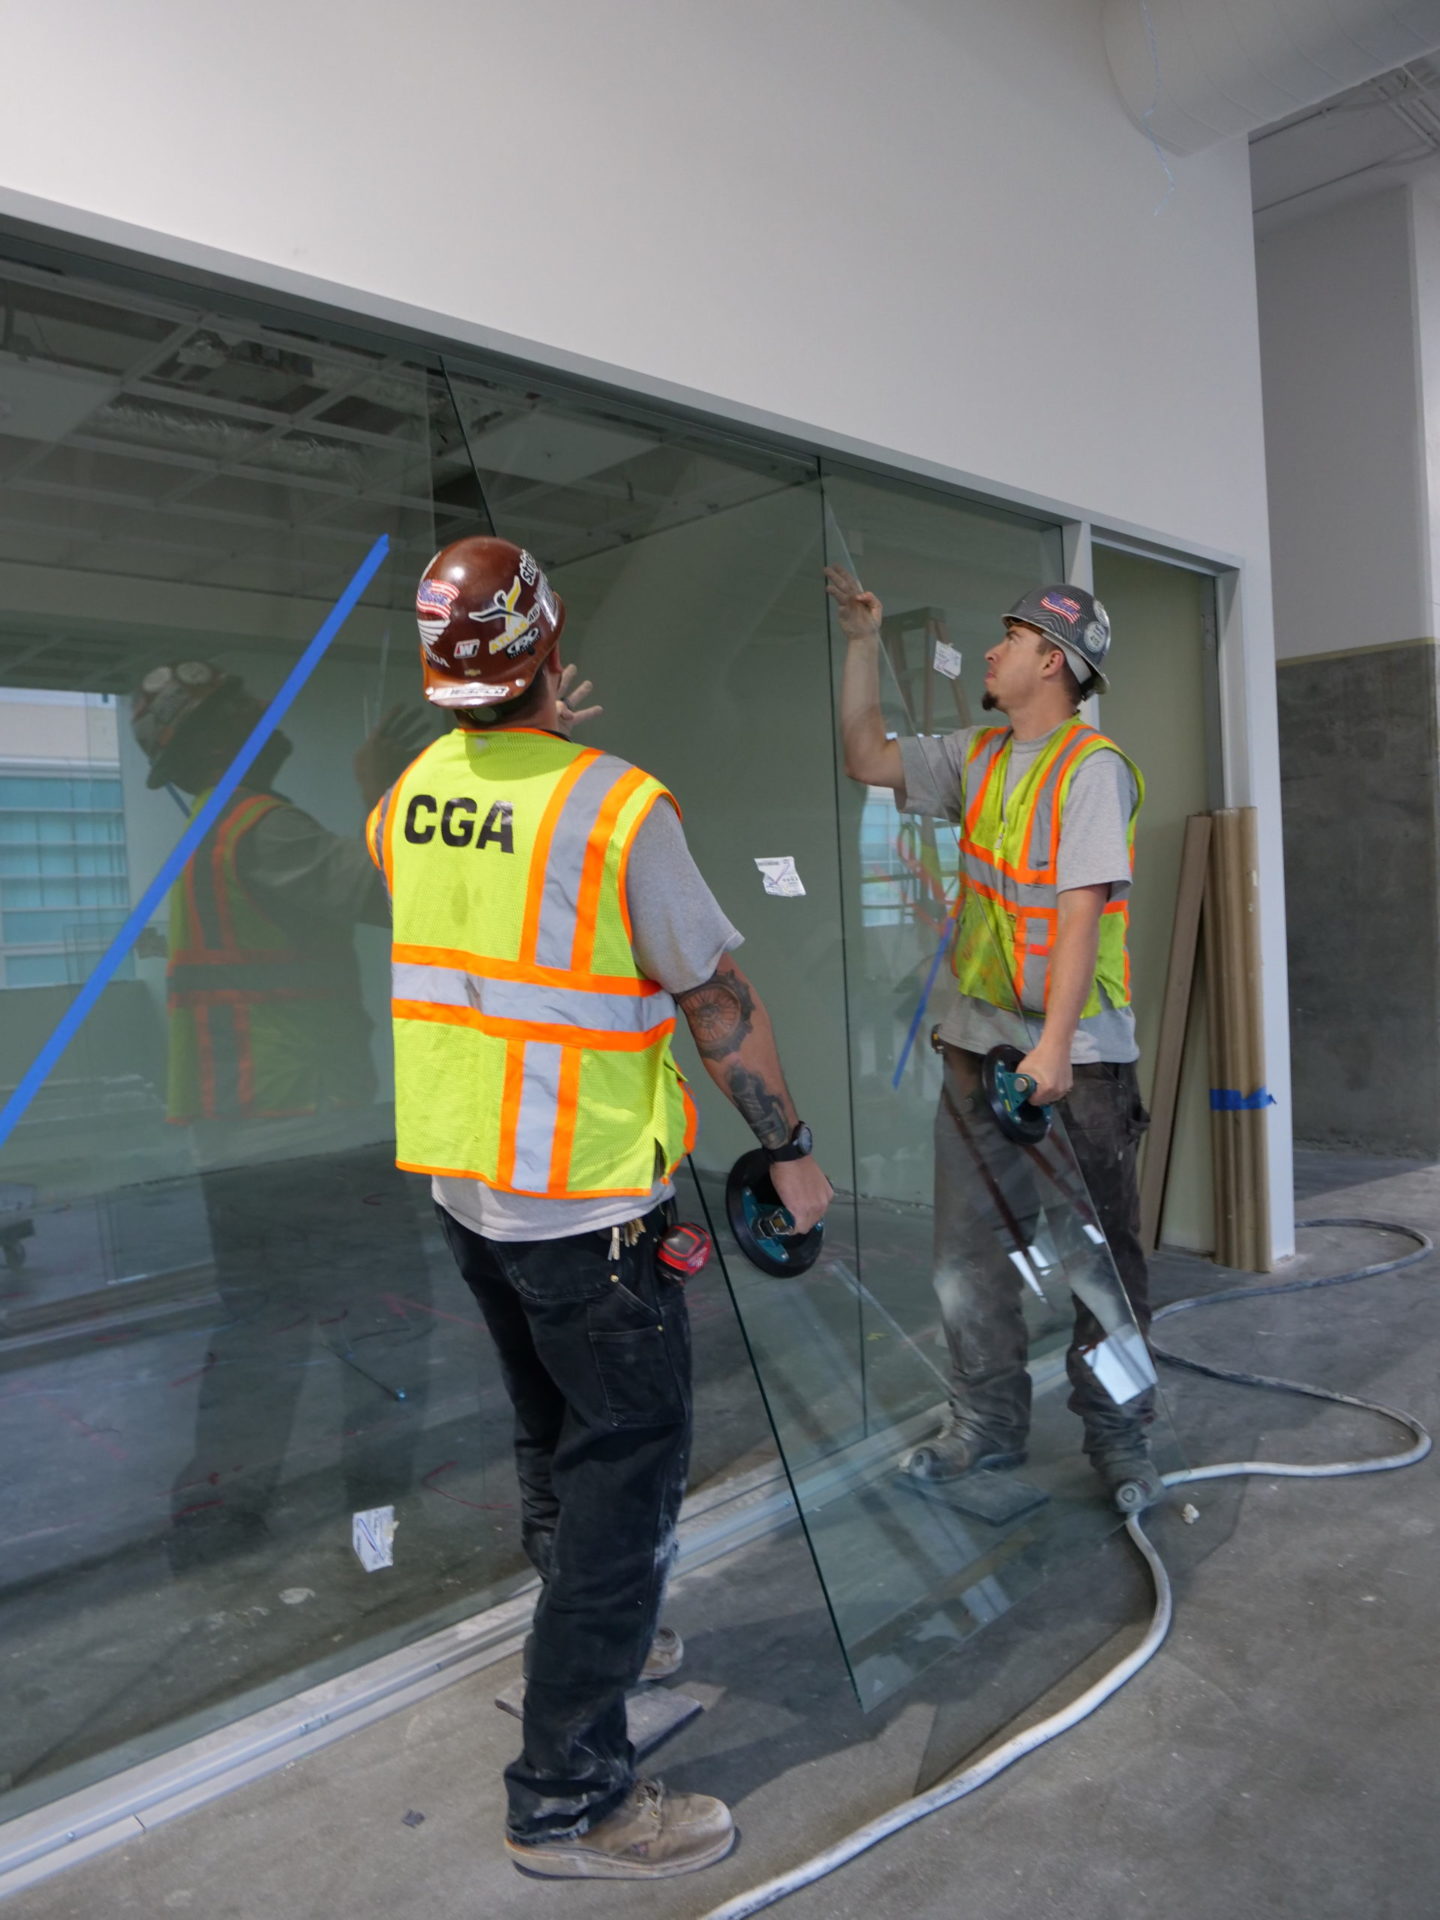 Image from the Gallery: Glaziers 2019